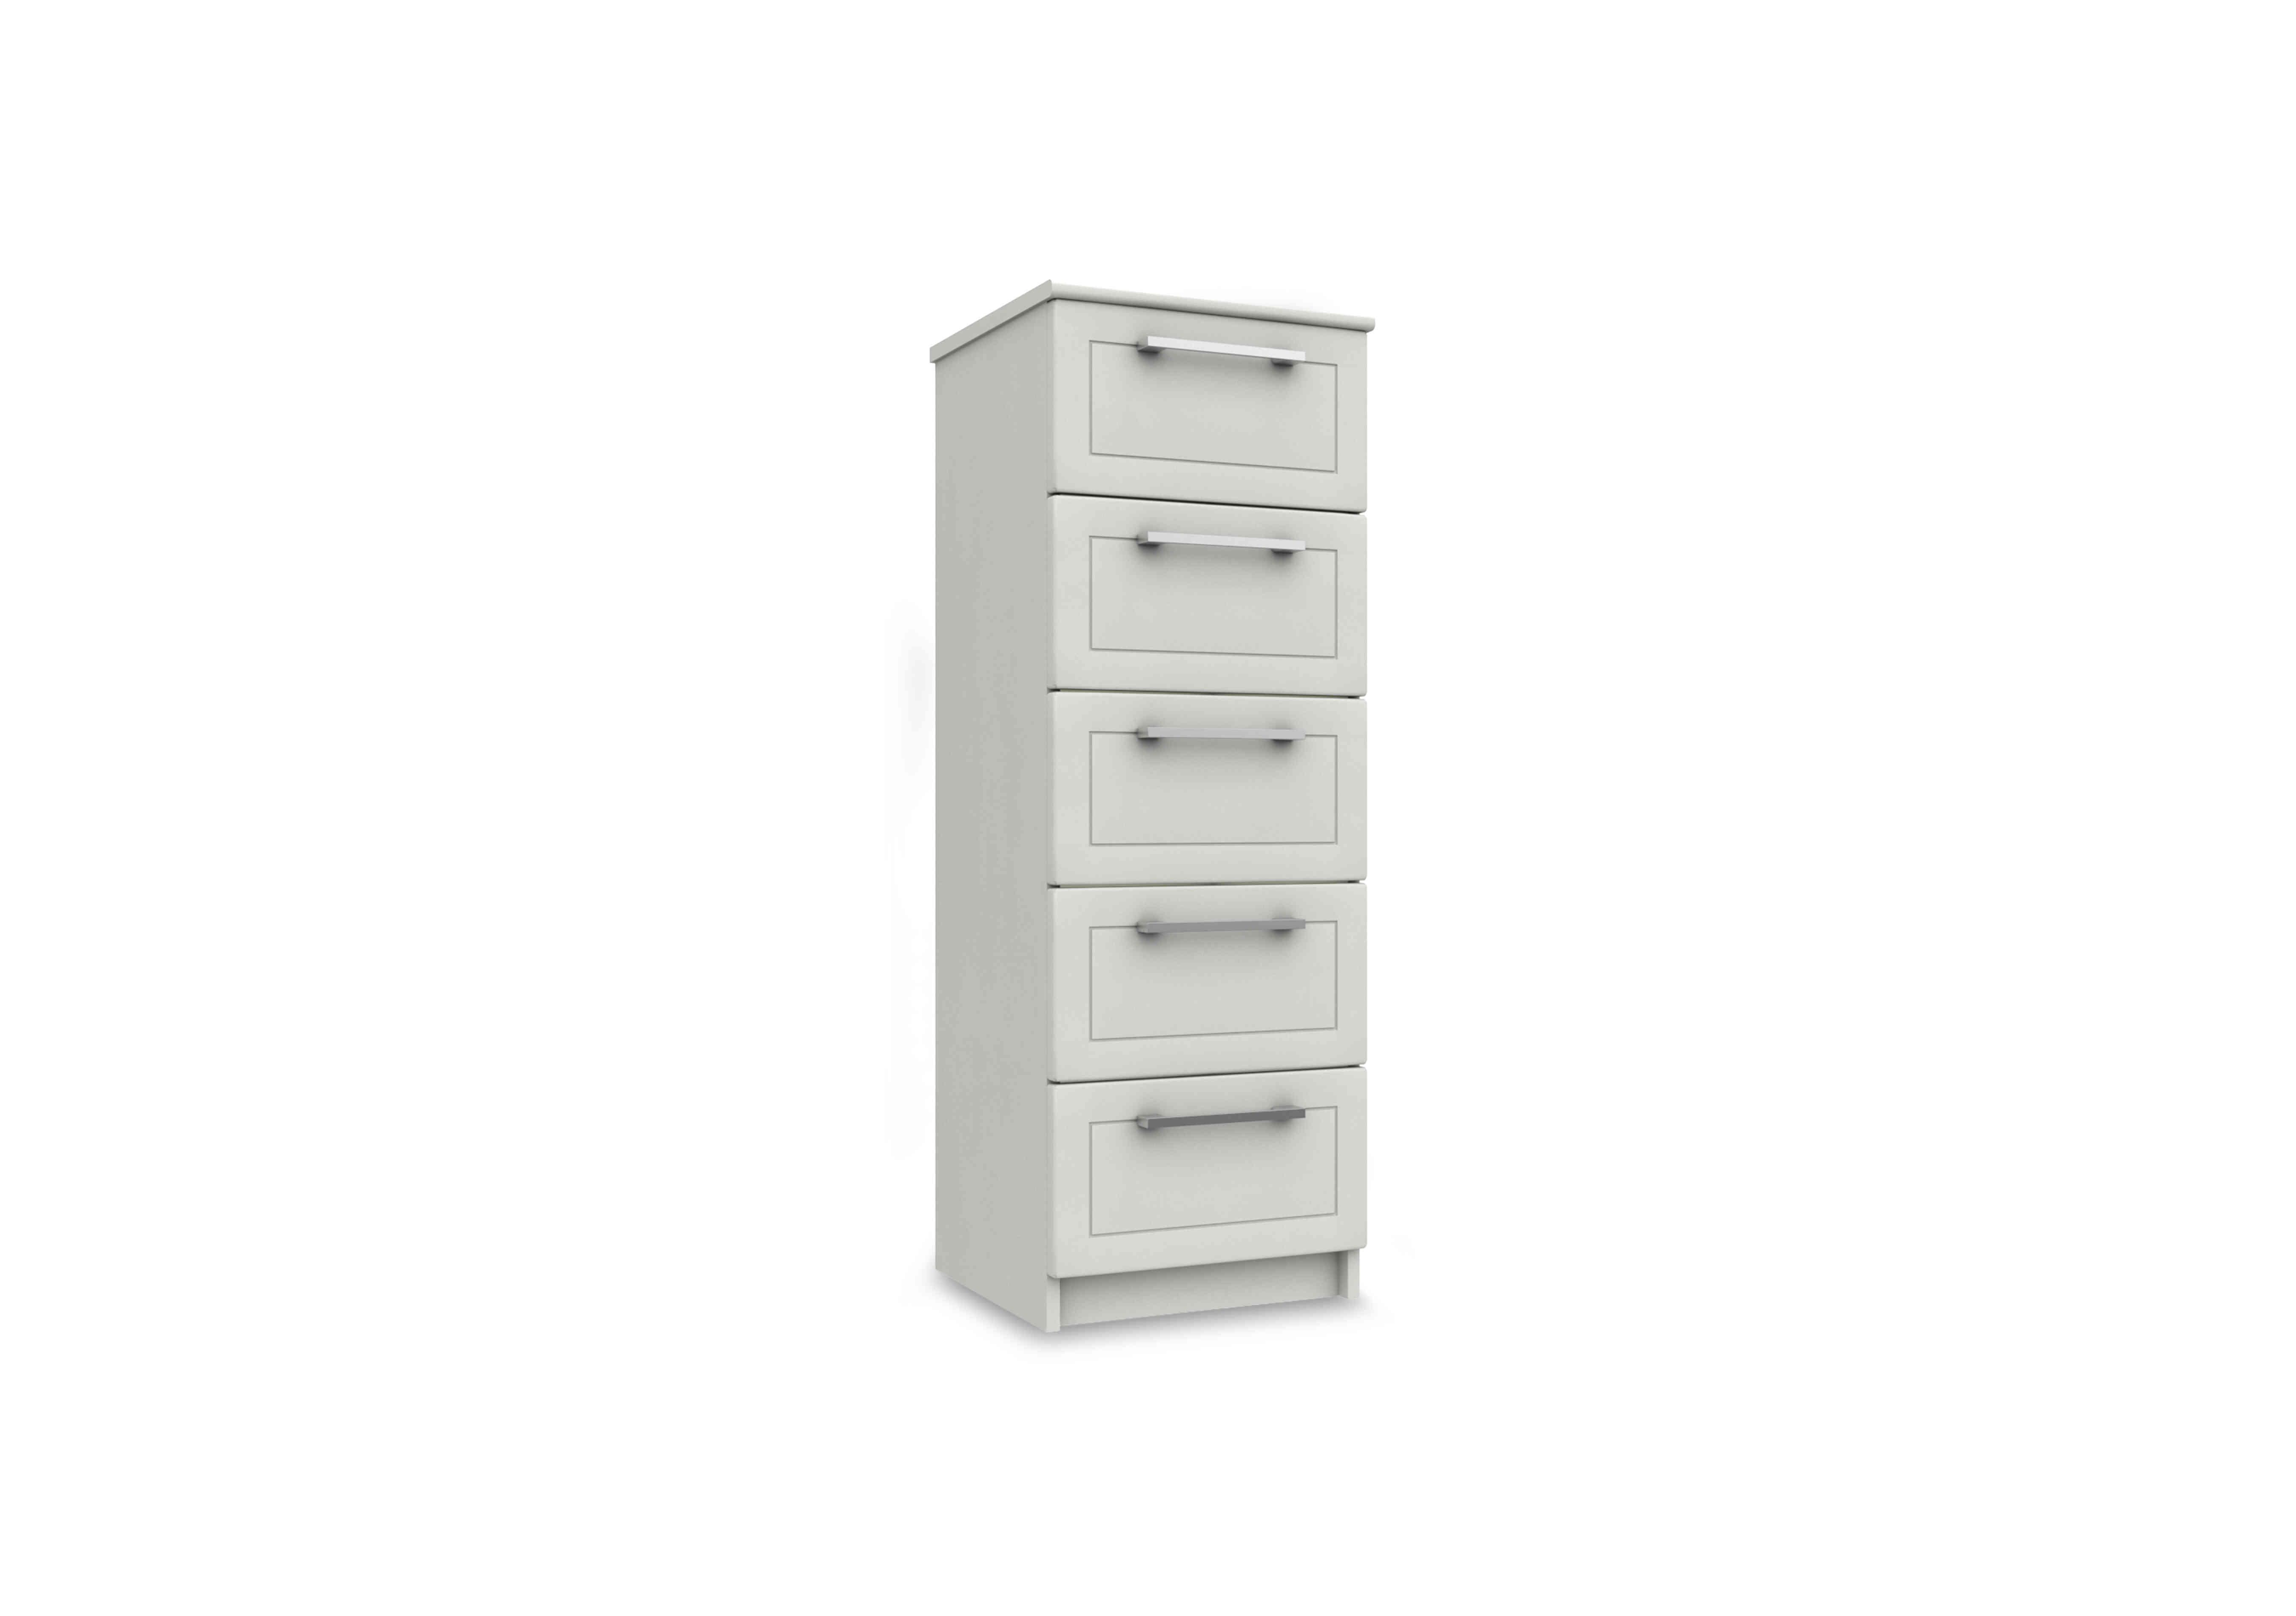 Bexley 5 Drawer Tall Boy in White Gloss on Furniture Village